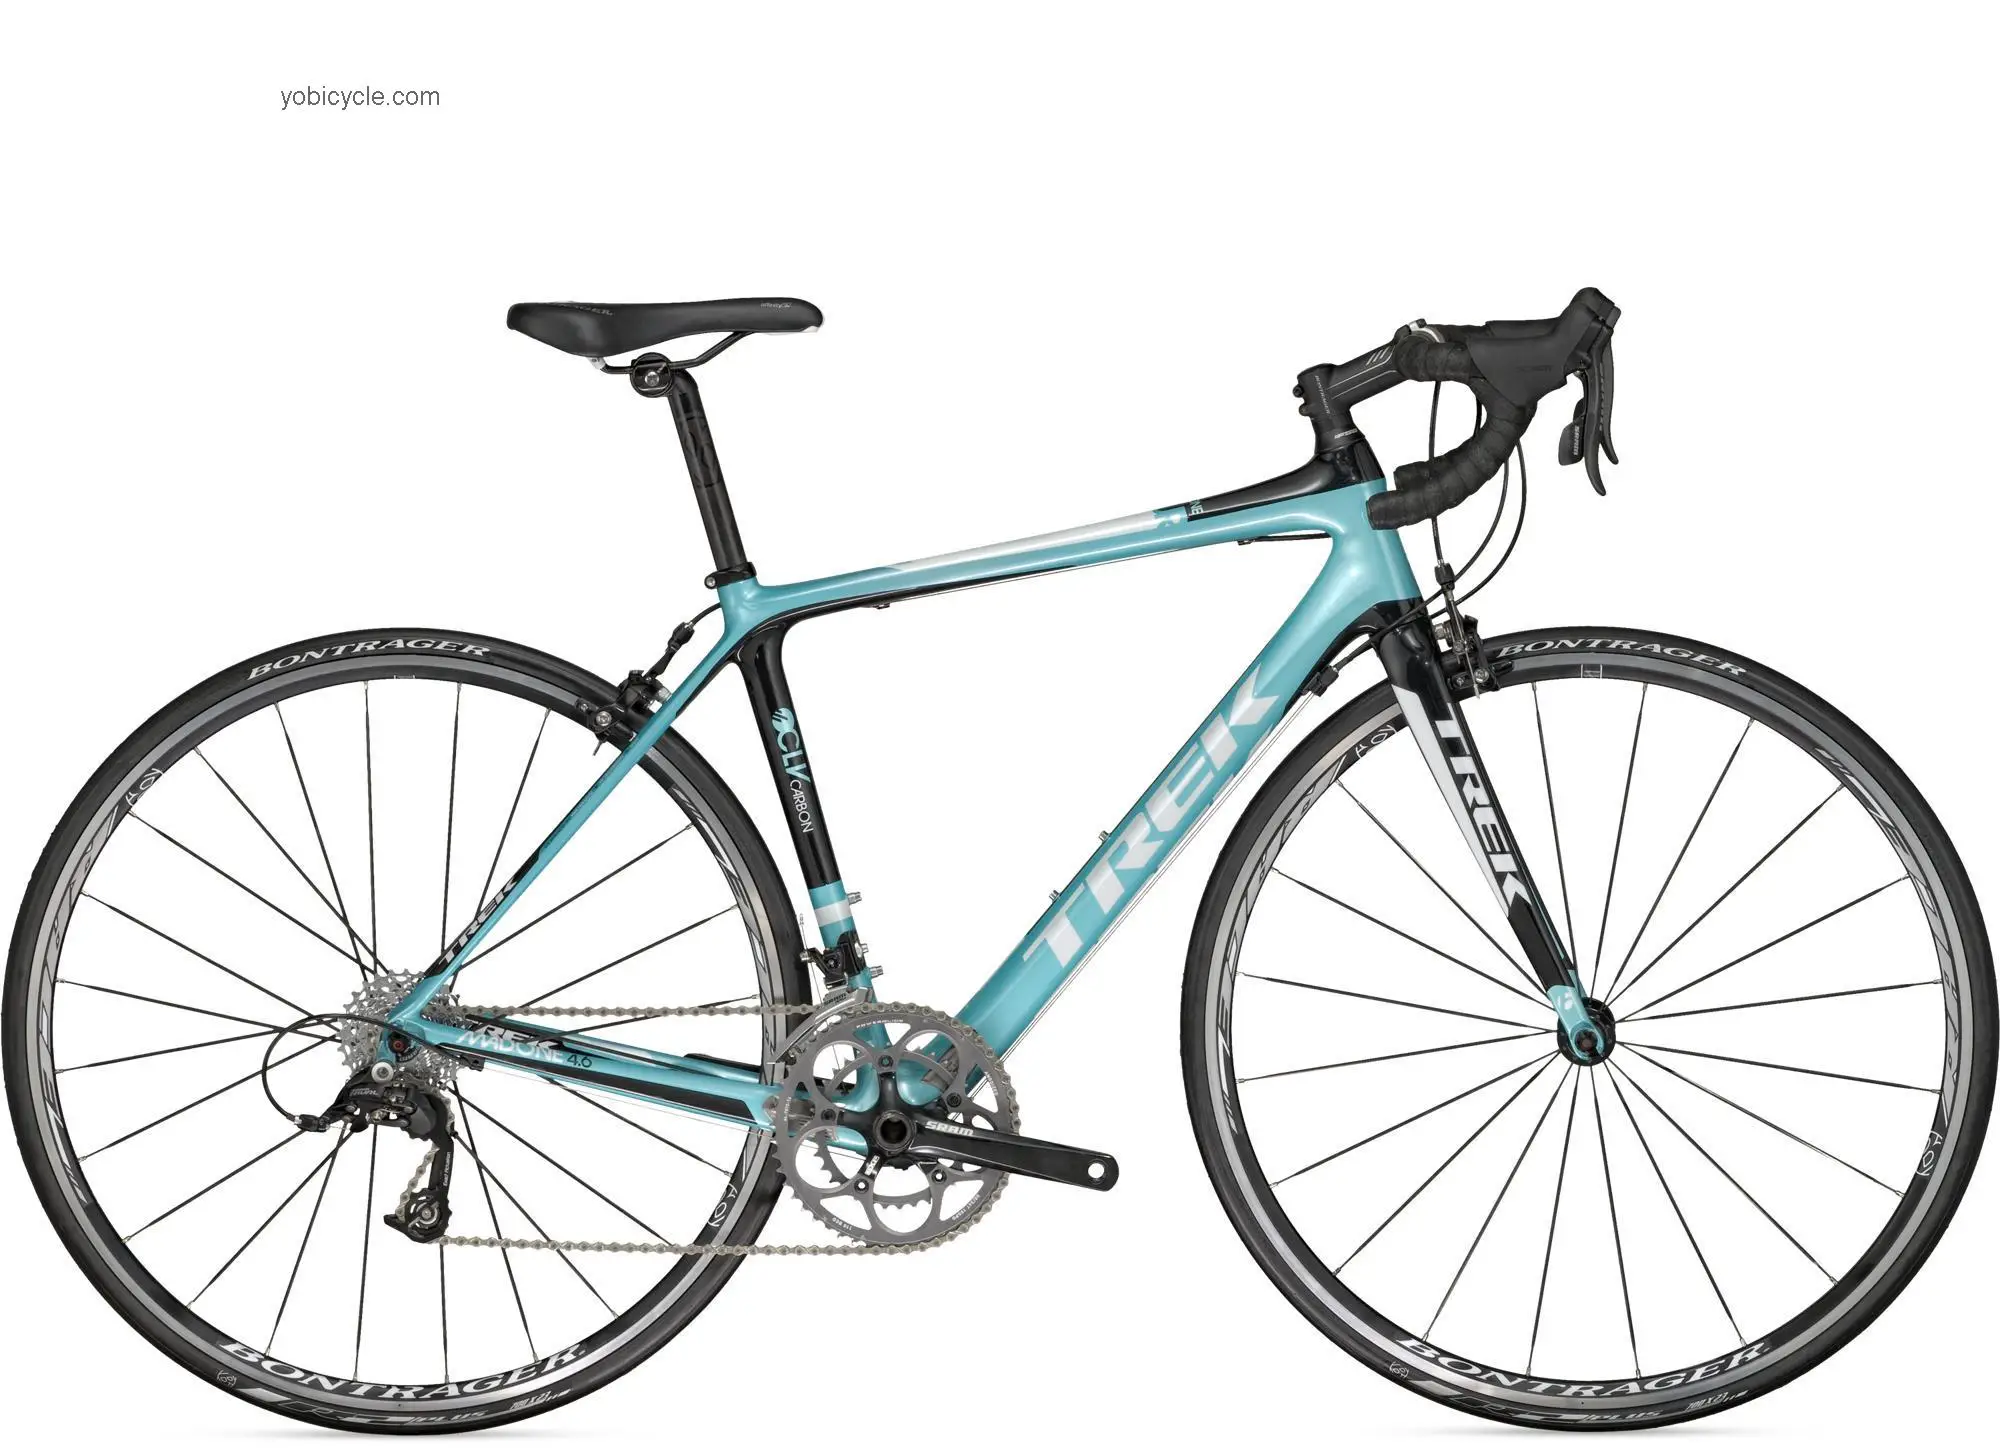 Trek Madone 4.6 WSD 2012 comparison online with competitors